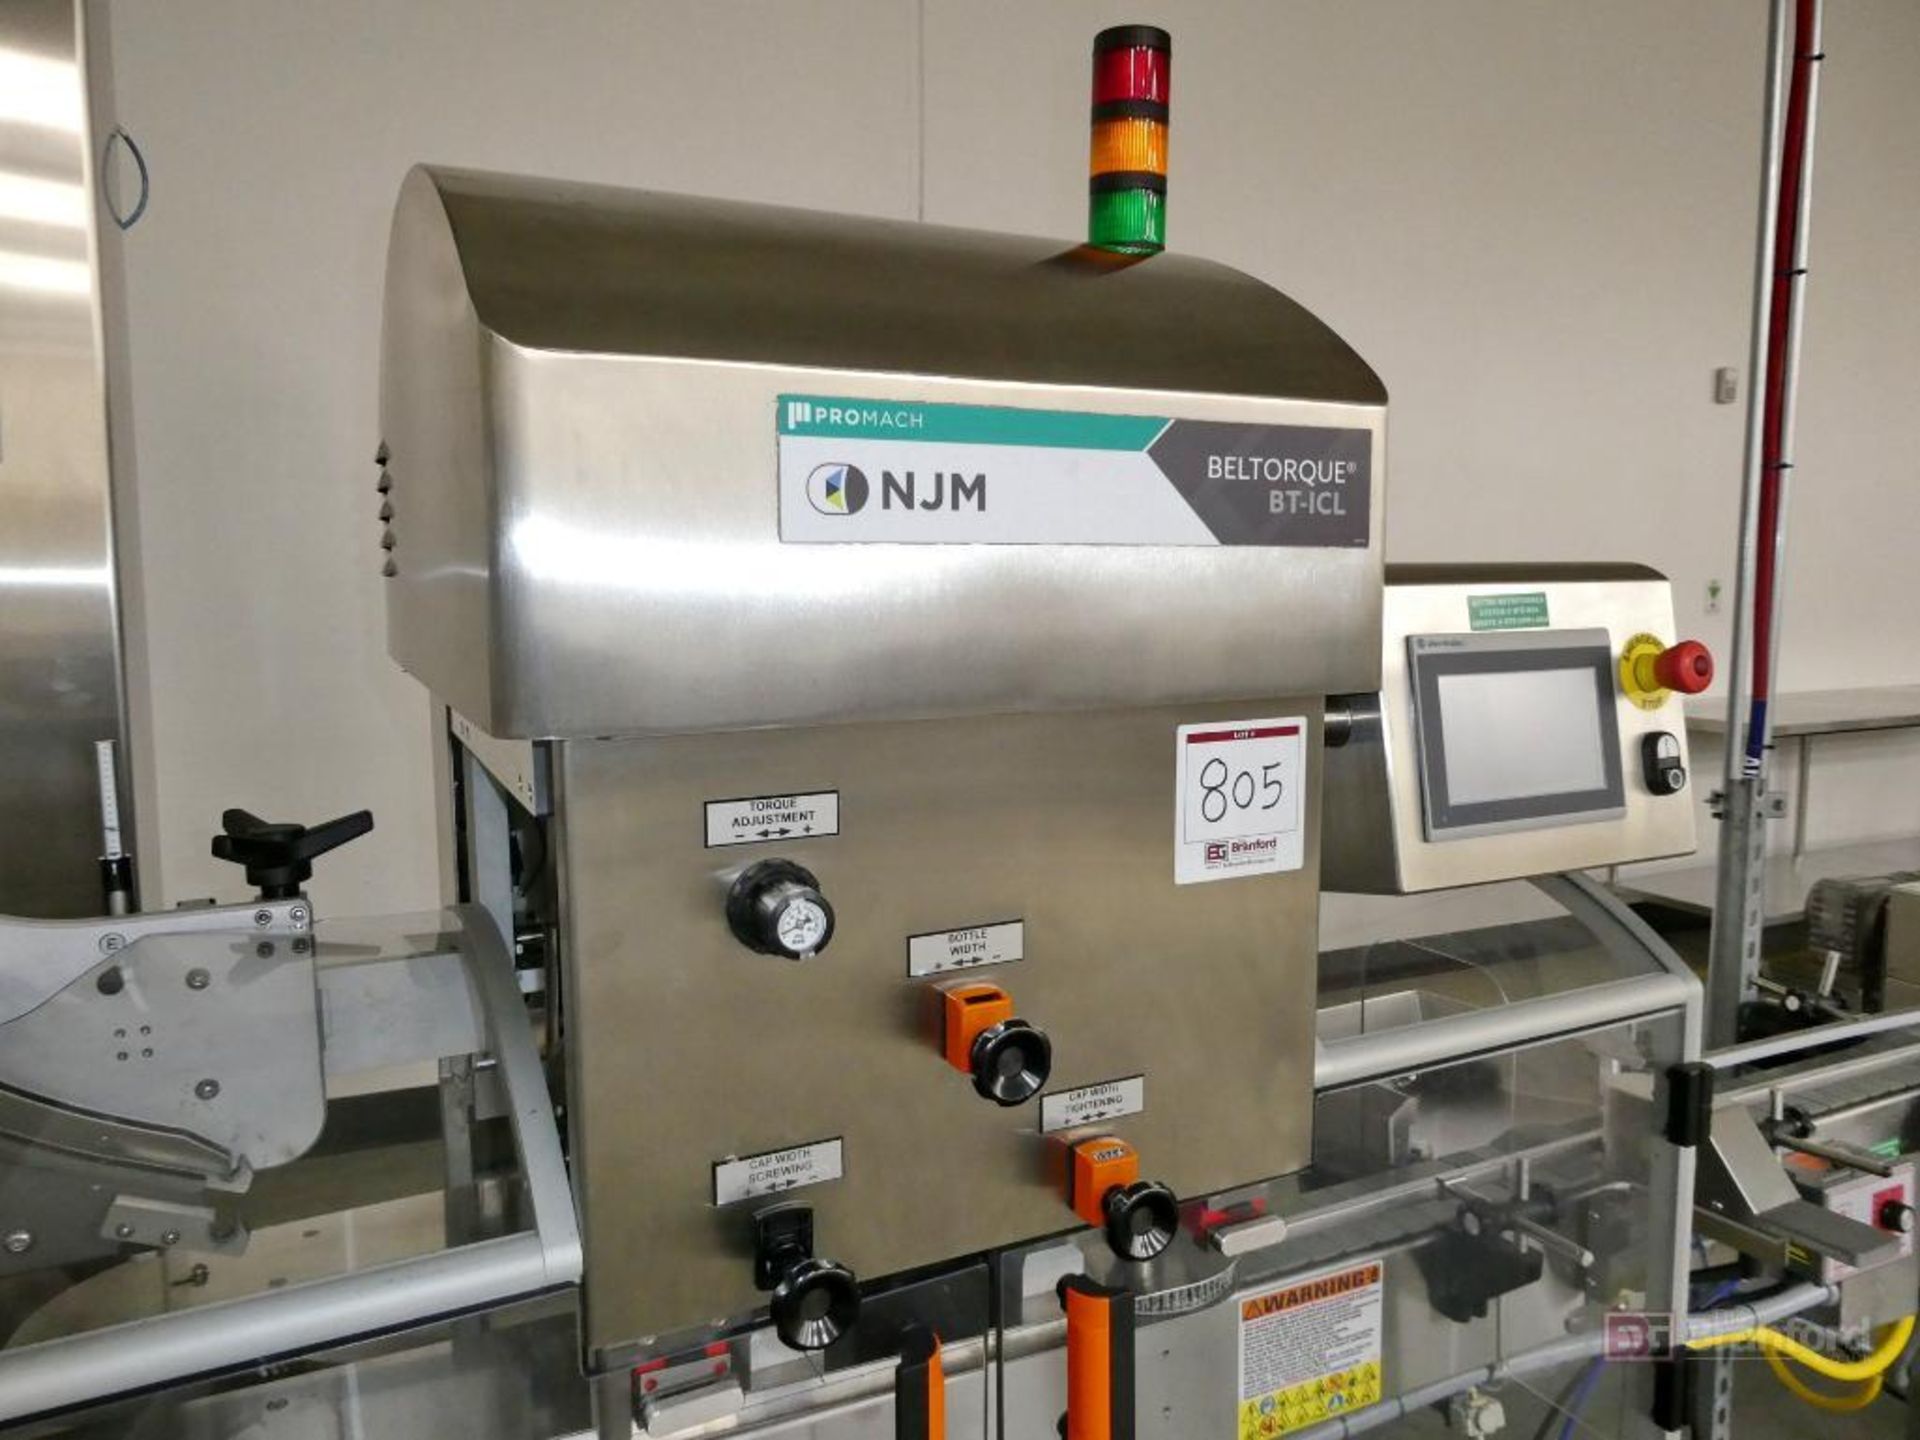 2020 NJM Packaging Model Beltorque BTIC, Stainless Steel Inline Capping Machine - Image 2 of 7